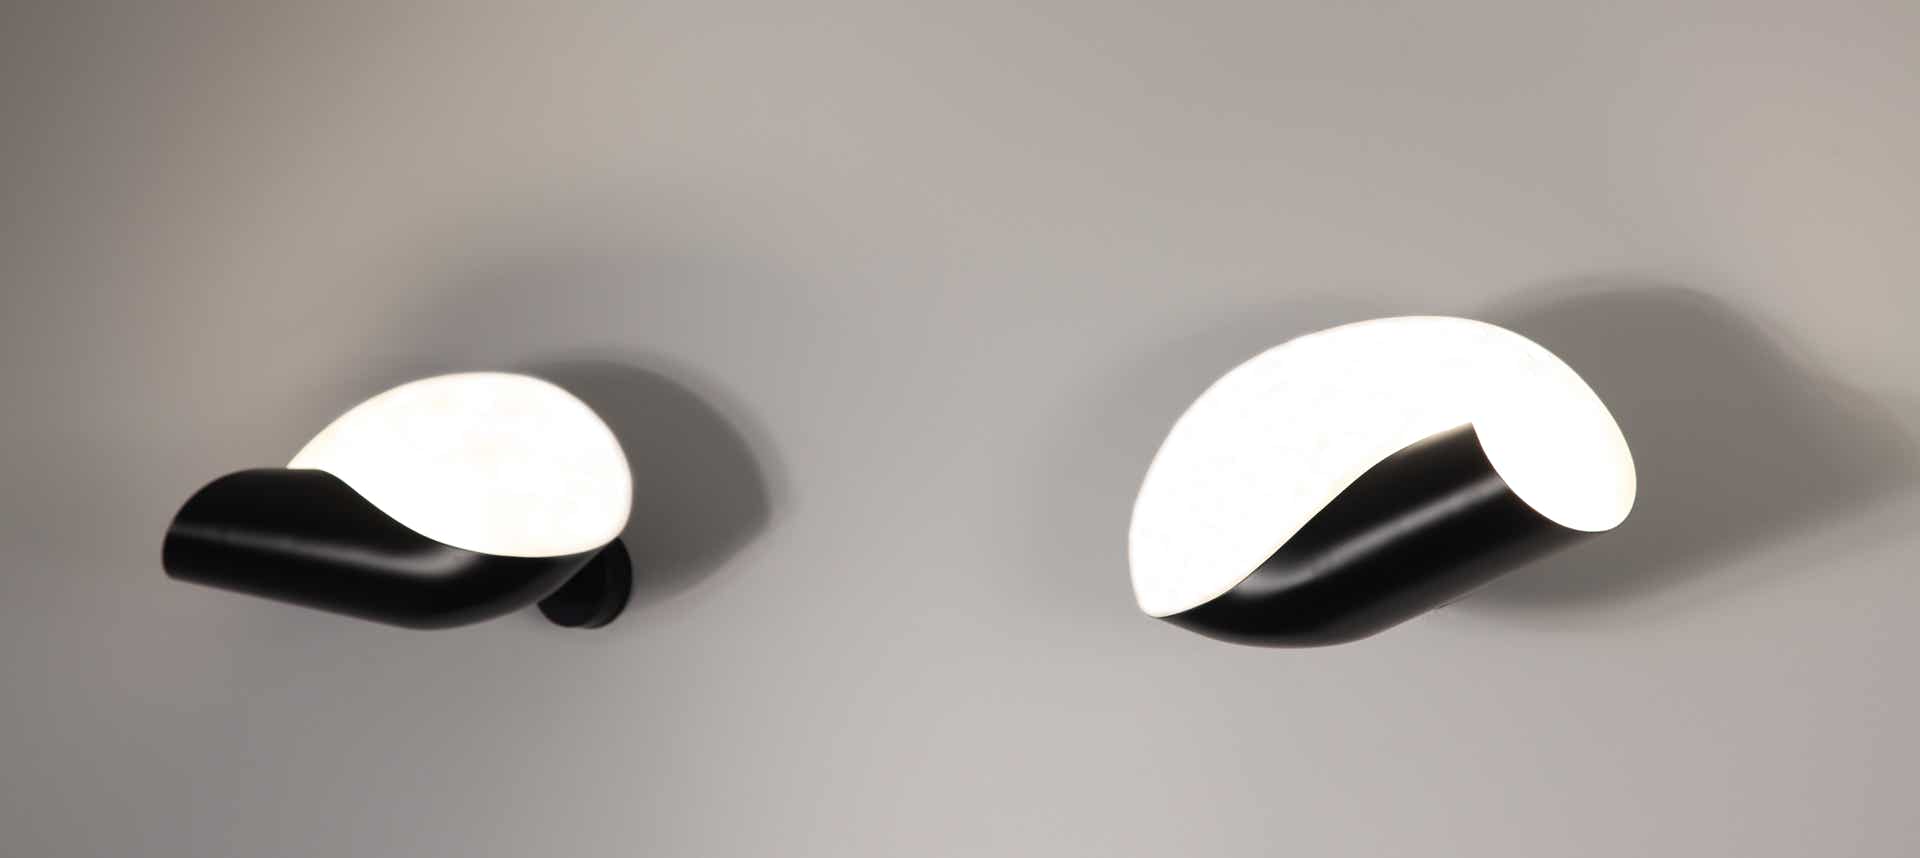 Serge Mouille Small Wall Lamps